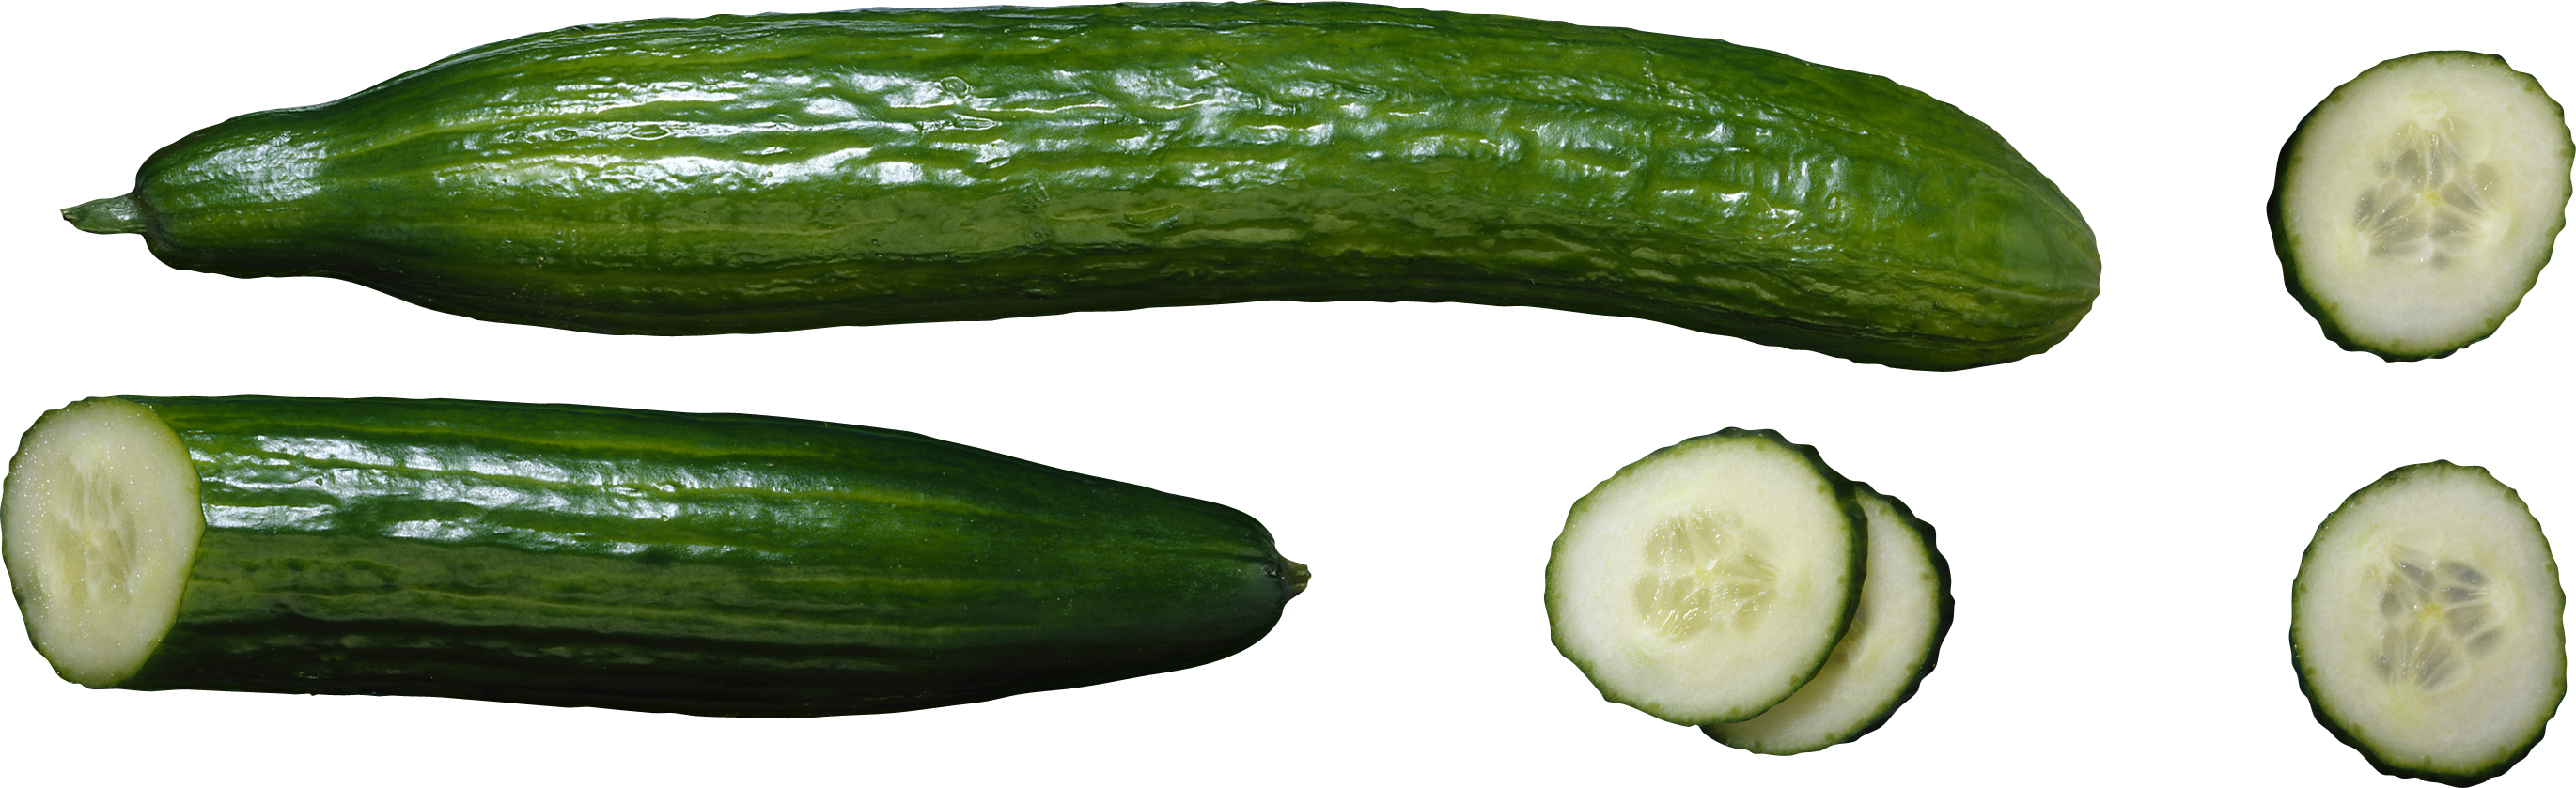 Sliced cucumbers PNG